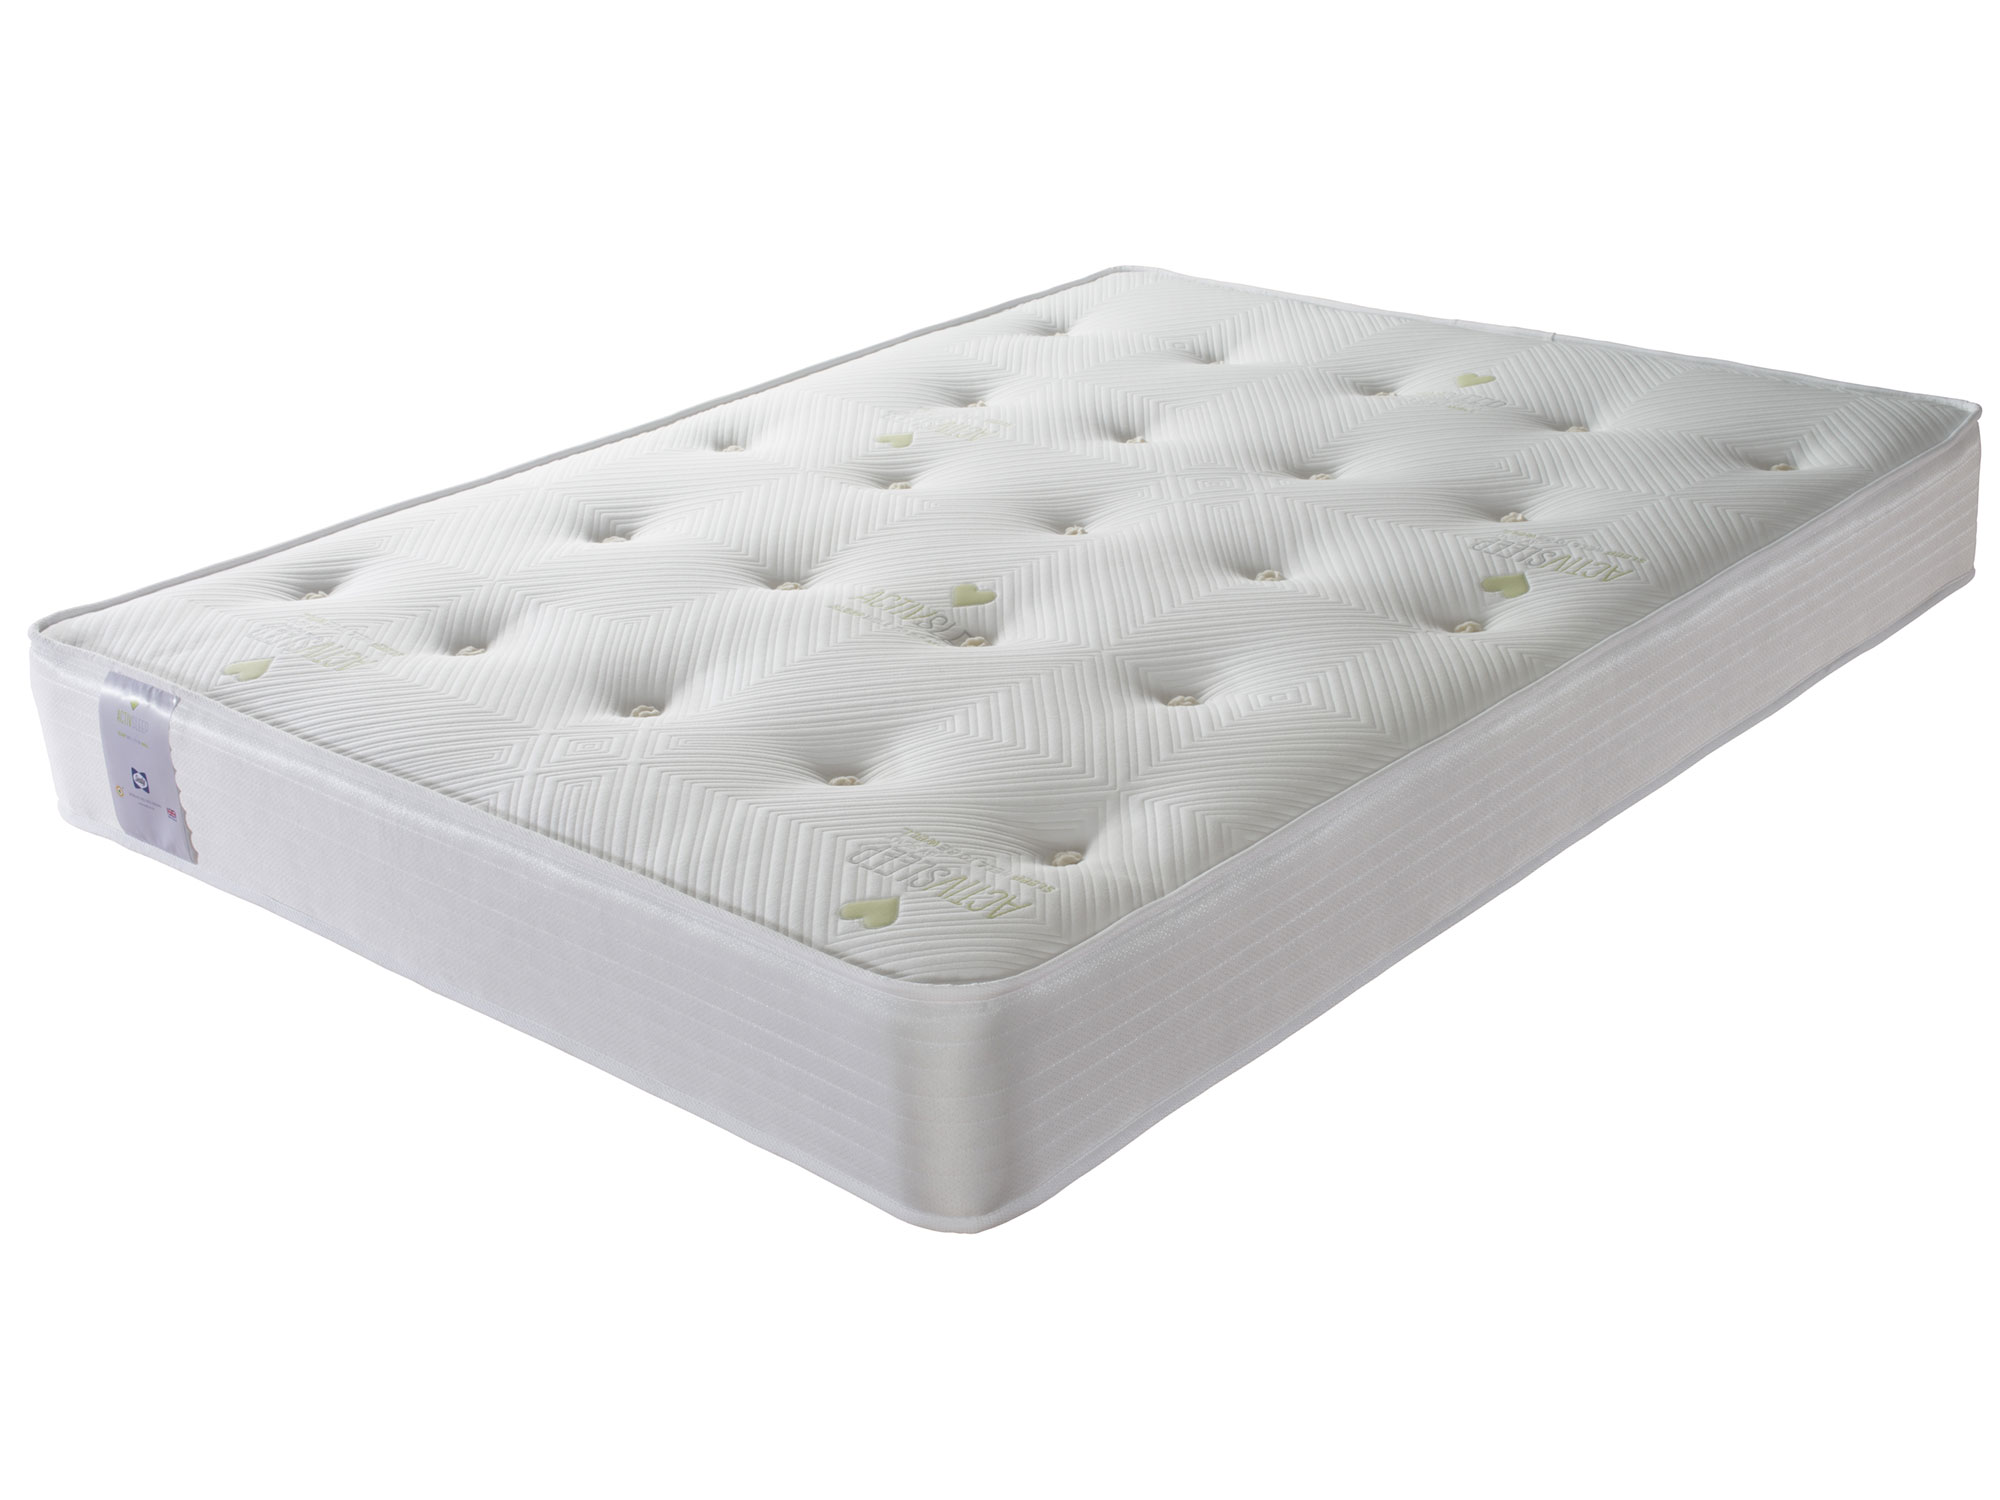 4ft6 Double Sealy ActivSleep Ortho Extra Firm Mattress